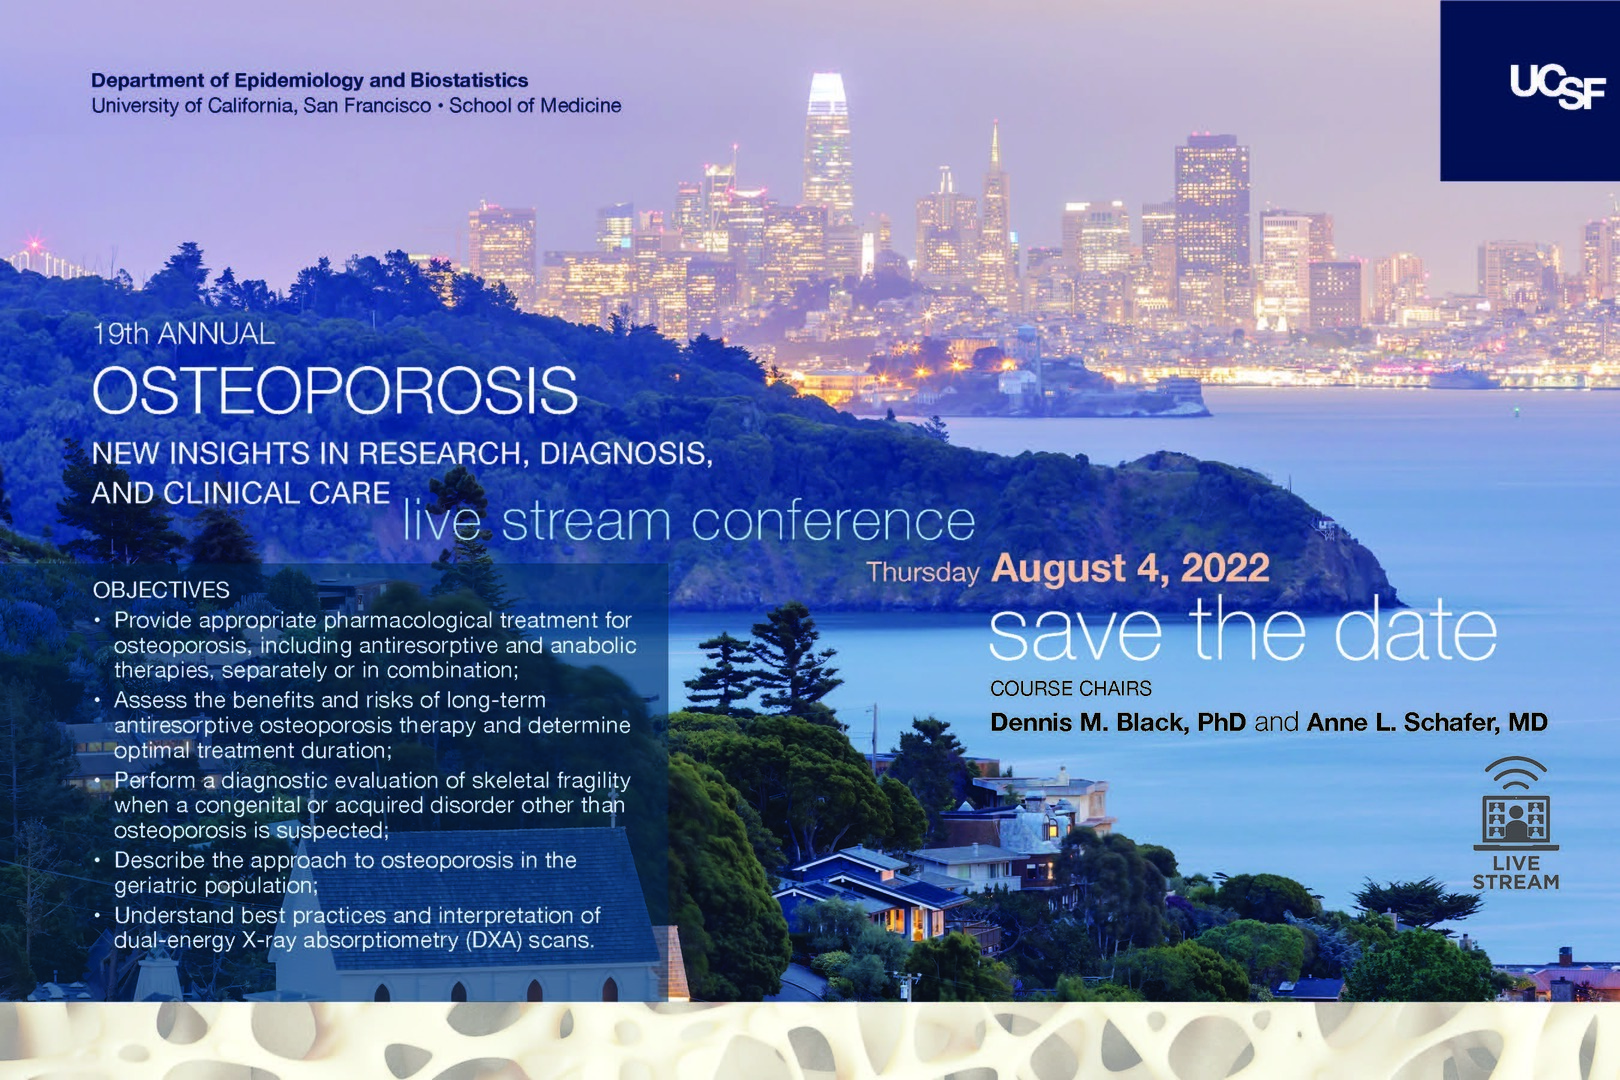 19th Annual UCSF Osteoporosis: New Insights in Research, Diagnosis, and Clinic Care, Online Event